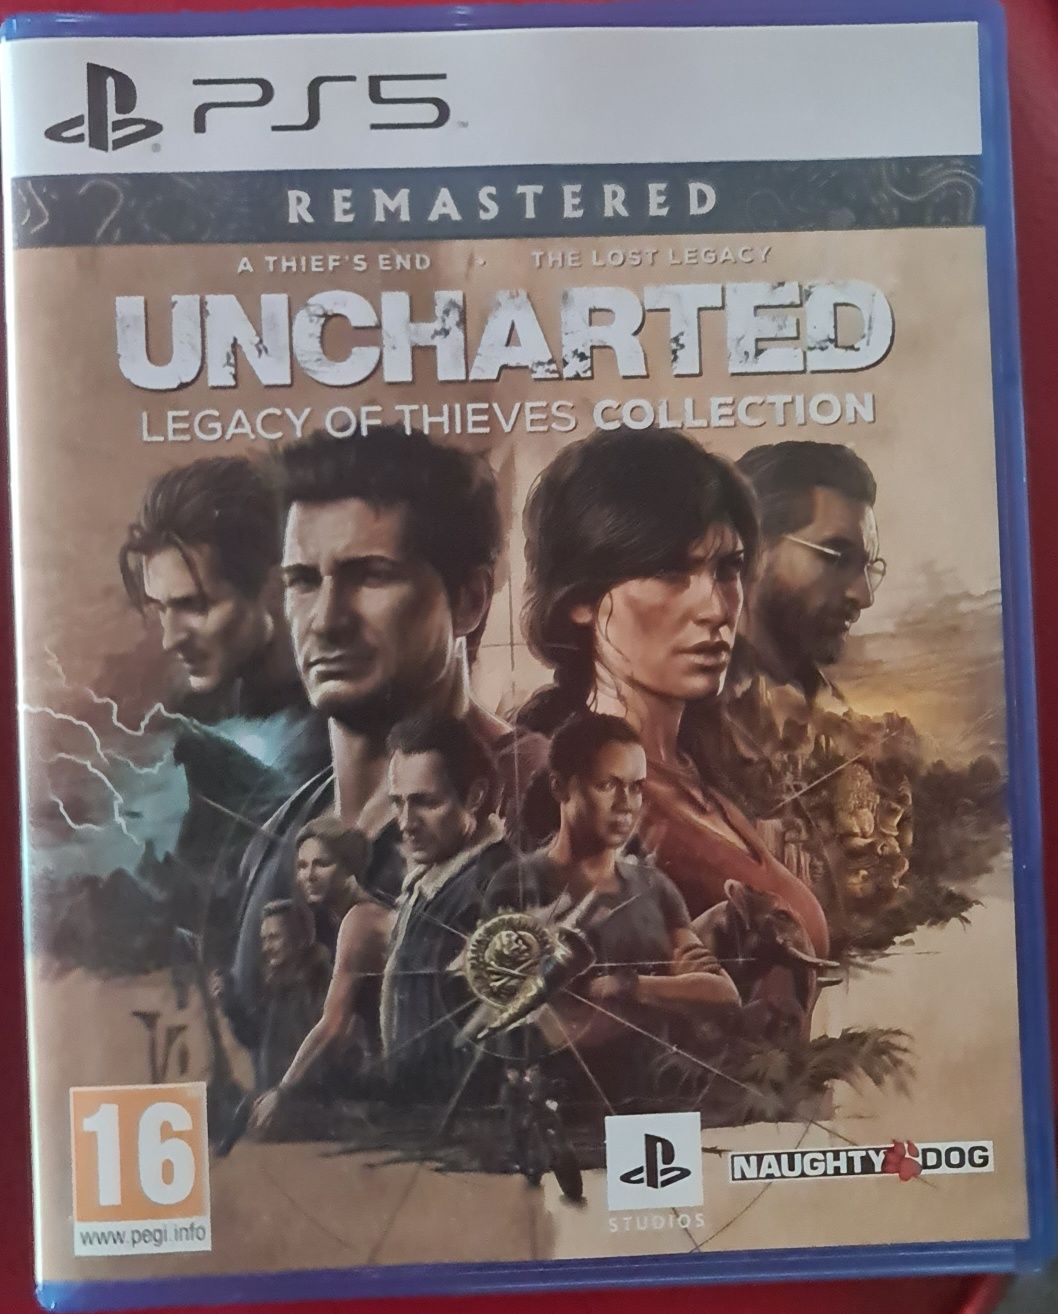 Uncarted remastered PS5